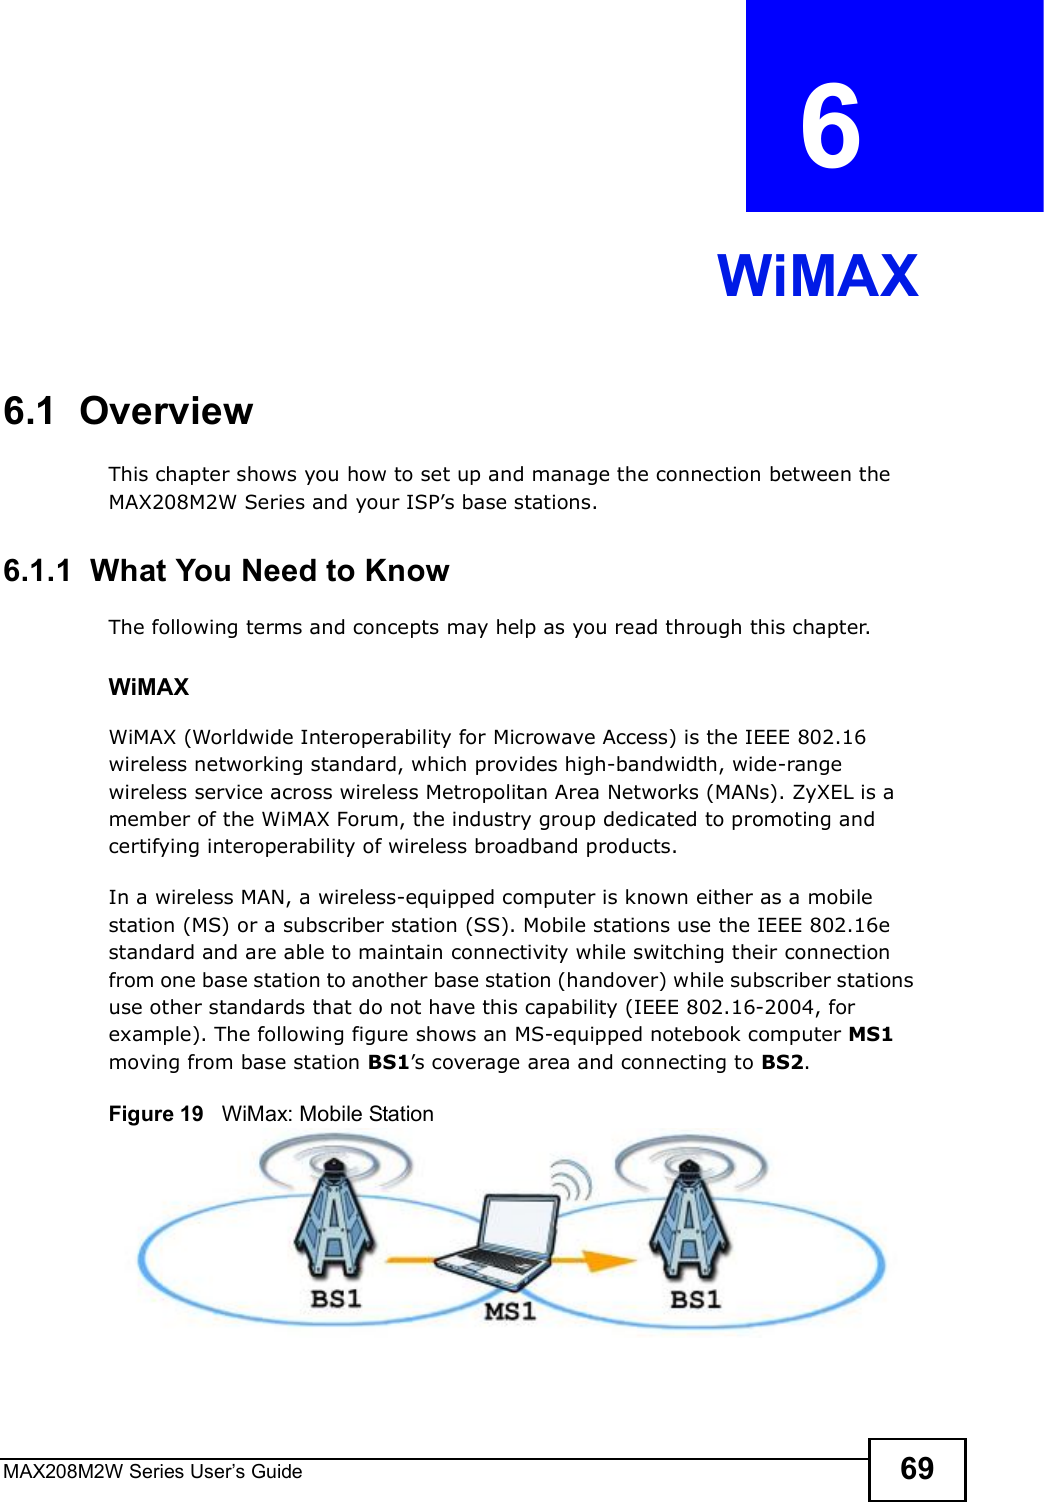 MAX208M2W Series User s Guide 69CHAPTER  6 WiMAX6.1  OverviewThis chapter shows you how to set up and manage the connection between the MAX208M2W Series and your ISP s base stations.6.1.1  What You Need to KnowThe following terms and concepts may help as you read through this chapter.WiMAX WiMAX (Worldwide Interoperability for Microwave Access) is the IEEE 802.16 wireless networking standard, which provides high-bandwidth, wide-range wireless service across wireless Metropolitan Area Networks (MANs). ZyXEL is a member of the WiMAX Forum, the industry group dedicated to promoting and certifying interoperability of wireless broadband products.In a wireless MAN, a wireless-equipped computer is known either as a mobile station (MS) or a subscriber station (SS). Mobile stations use the IEEE 802.16e standard and are able to maintain connectivity while switching their connection from one base station to another base station (handover) while subscriber stations use other standards that do not have this capability (IEEE 802.16-2004, for example). The following figure shows an MS-equipped notebook computer MS1 moving from base station BS1 s coverage area and connecting to BS2.Figure 19   WiMax: Mobile Station